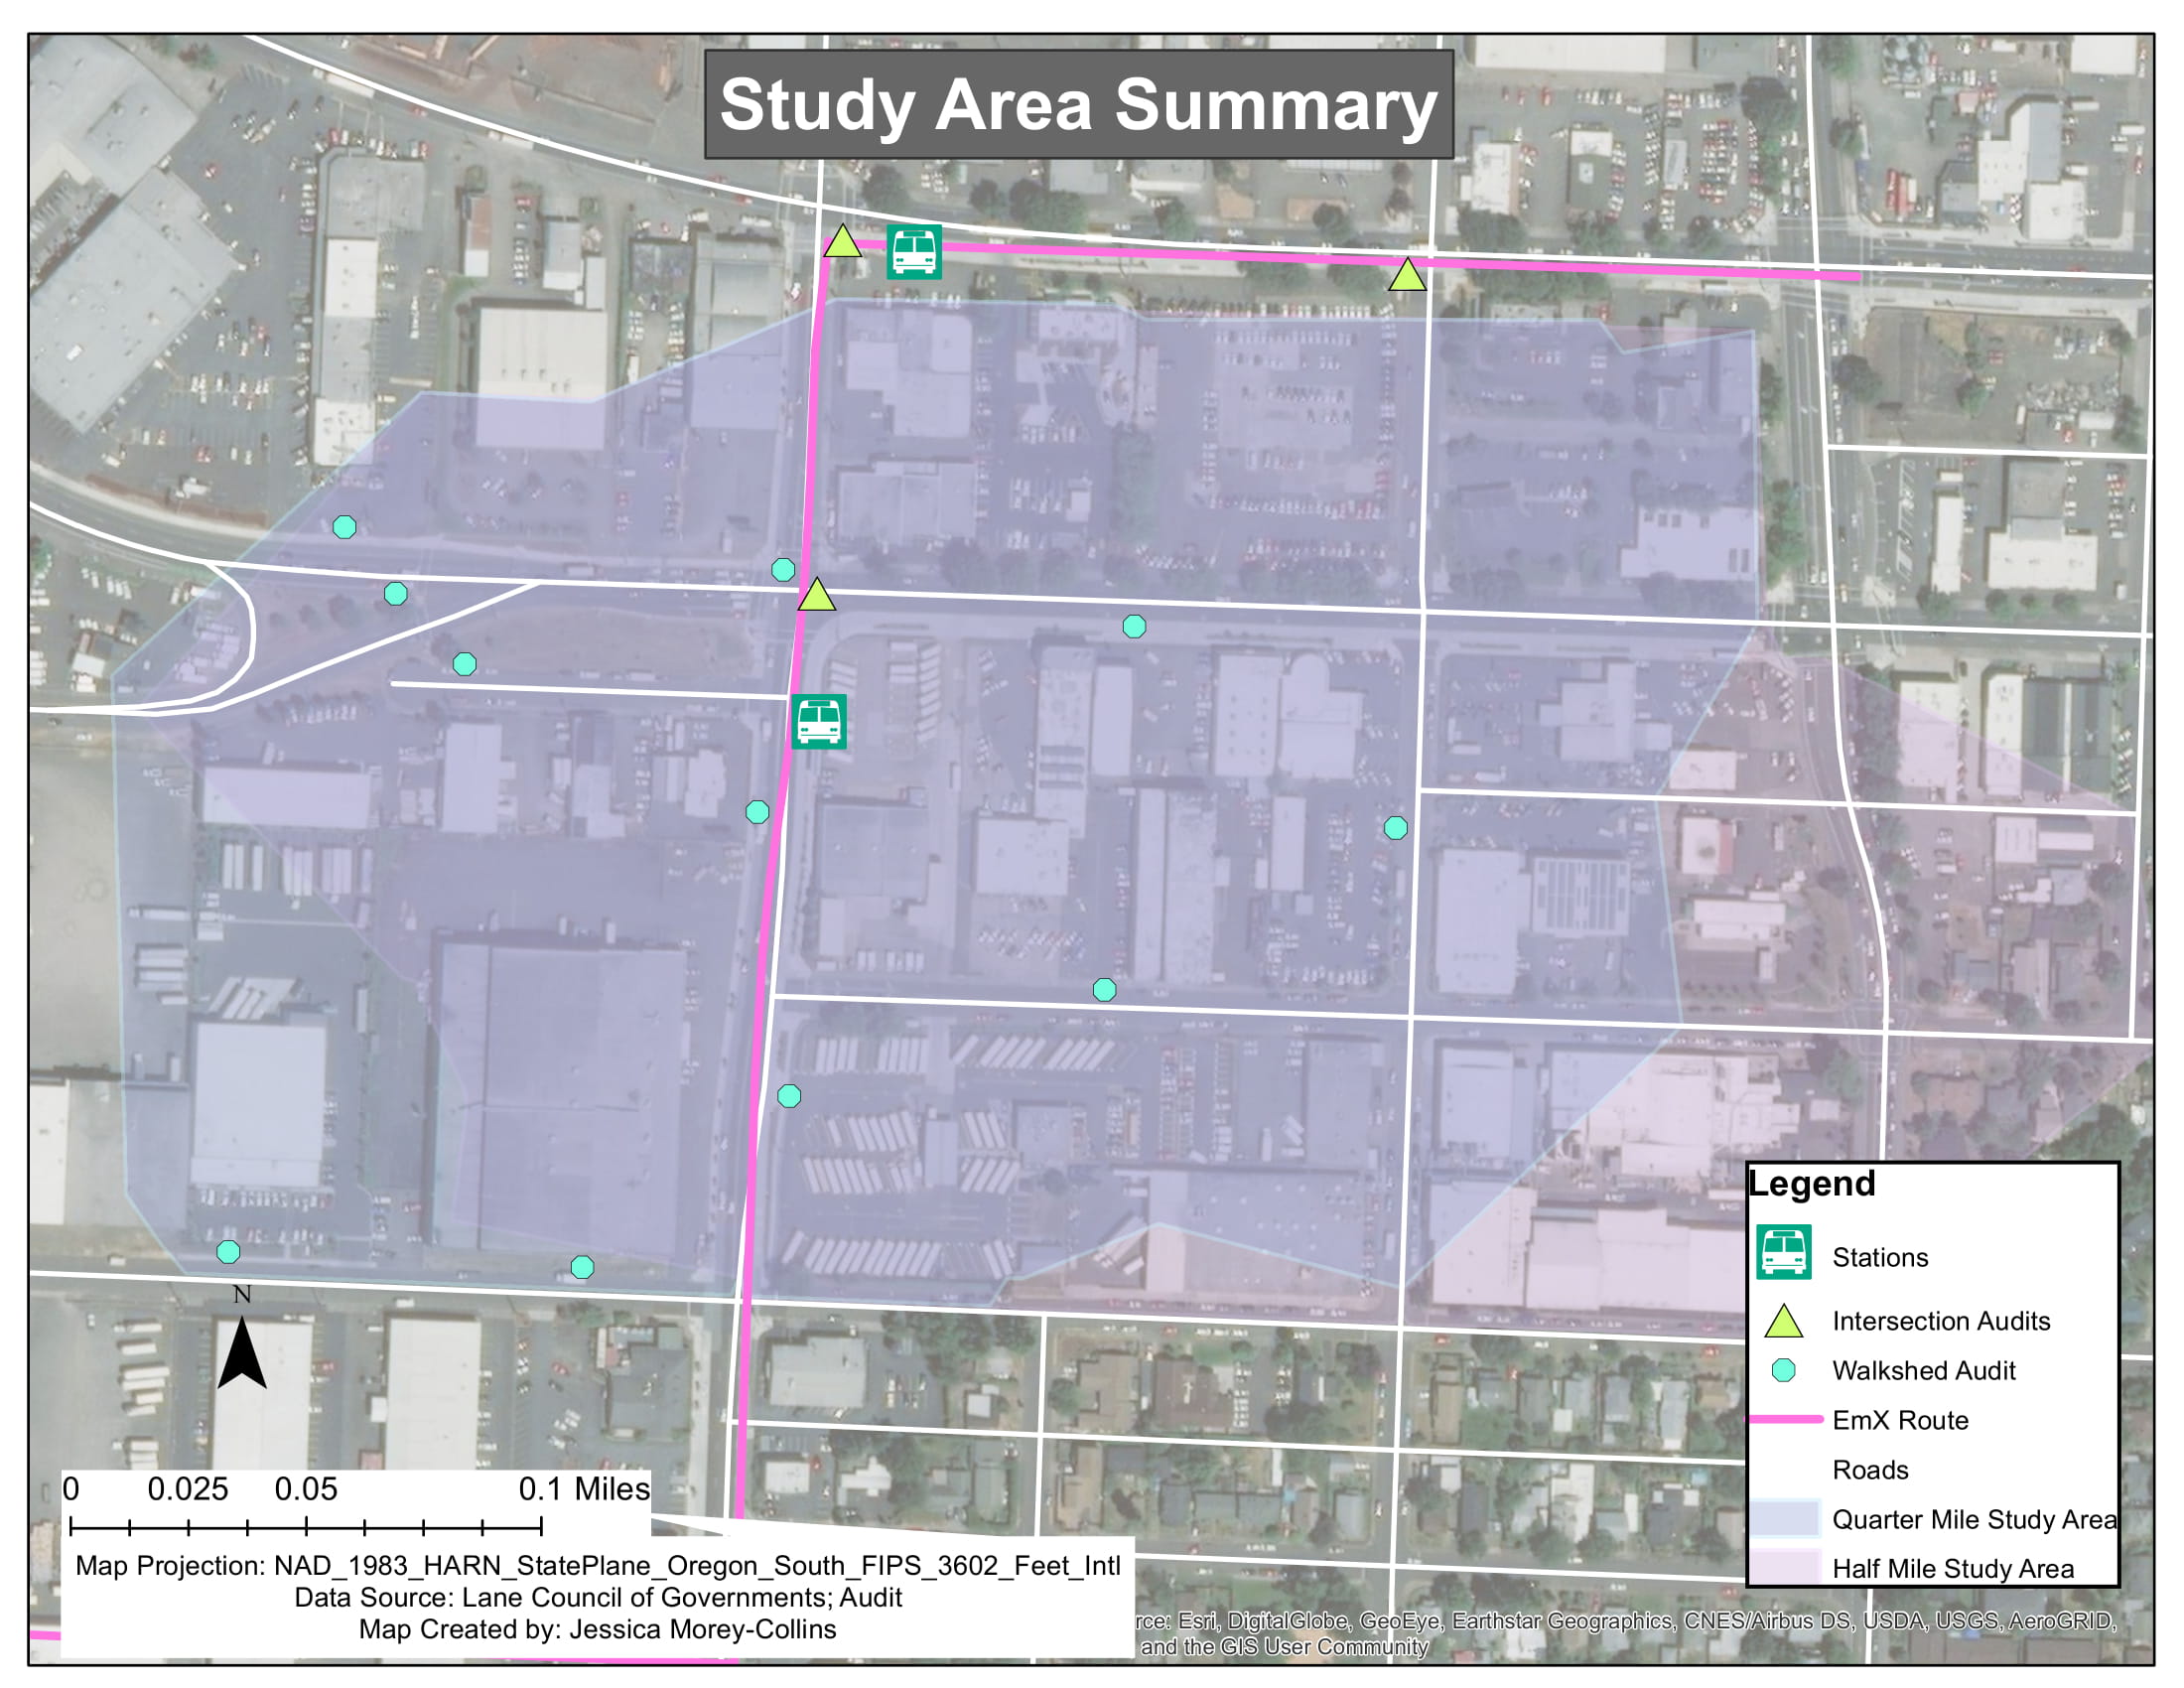  Study area summary for environmental analysis of a new public transportation line in Eugene, Oregon. 